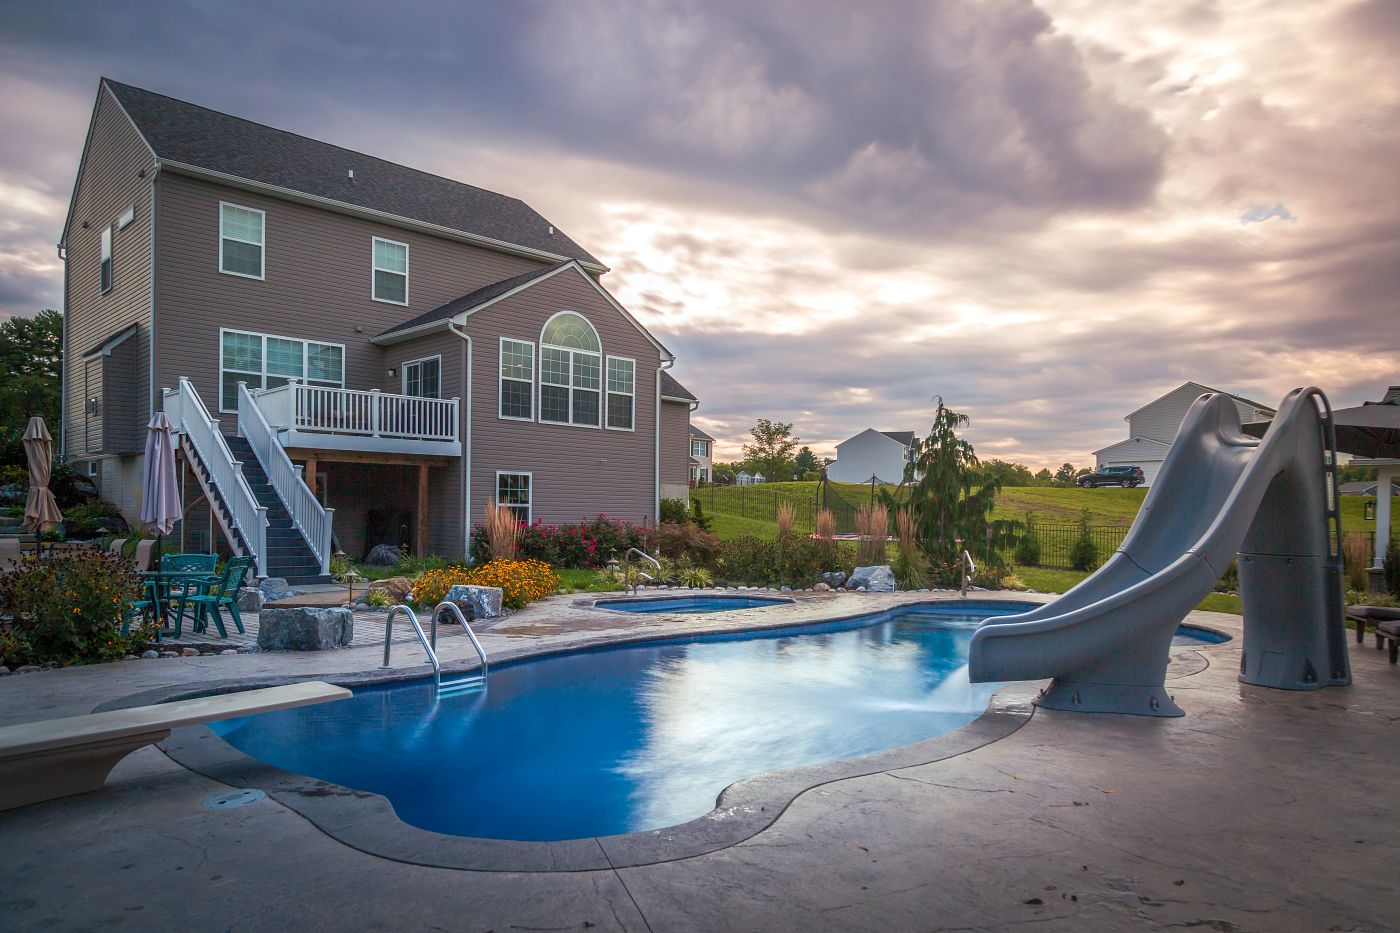 large fiberglass pool with spa, waterslide, and diving board in northeast backyard